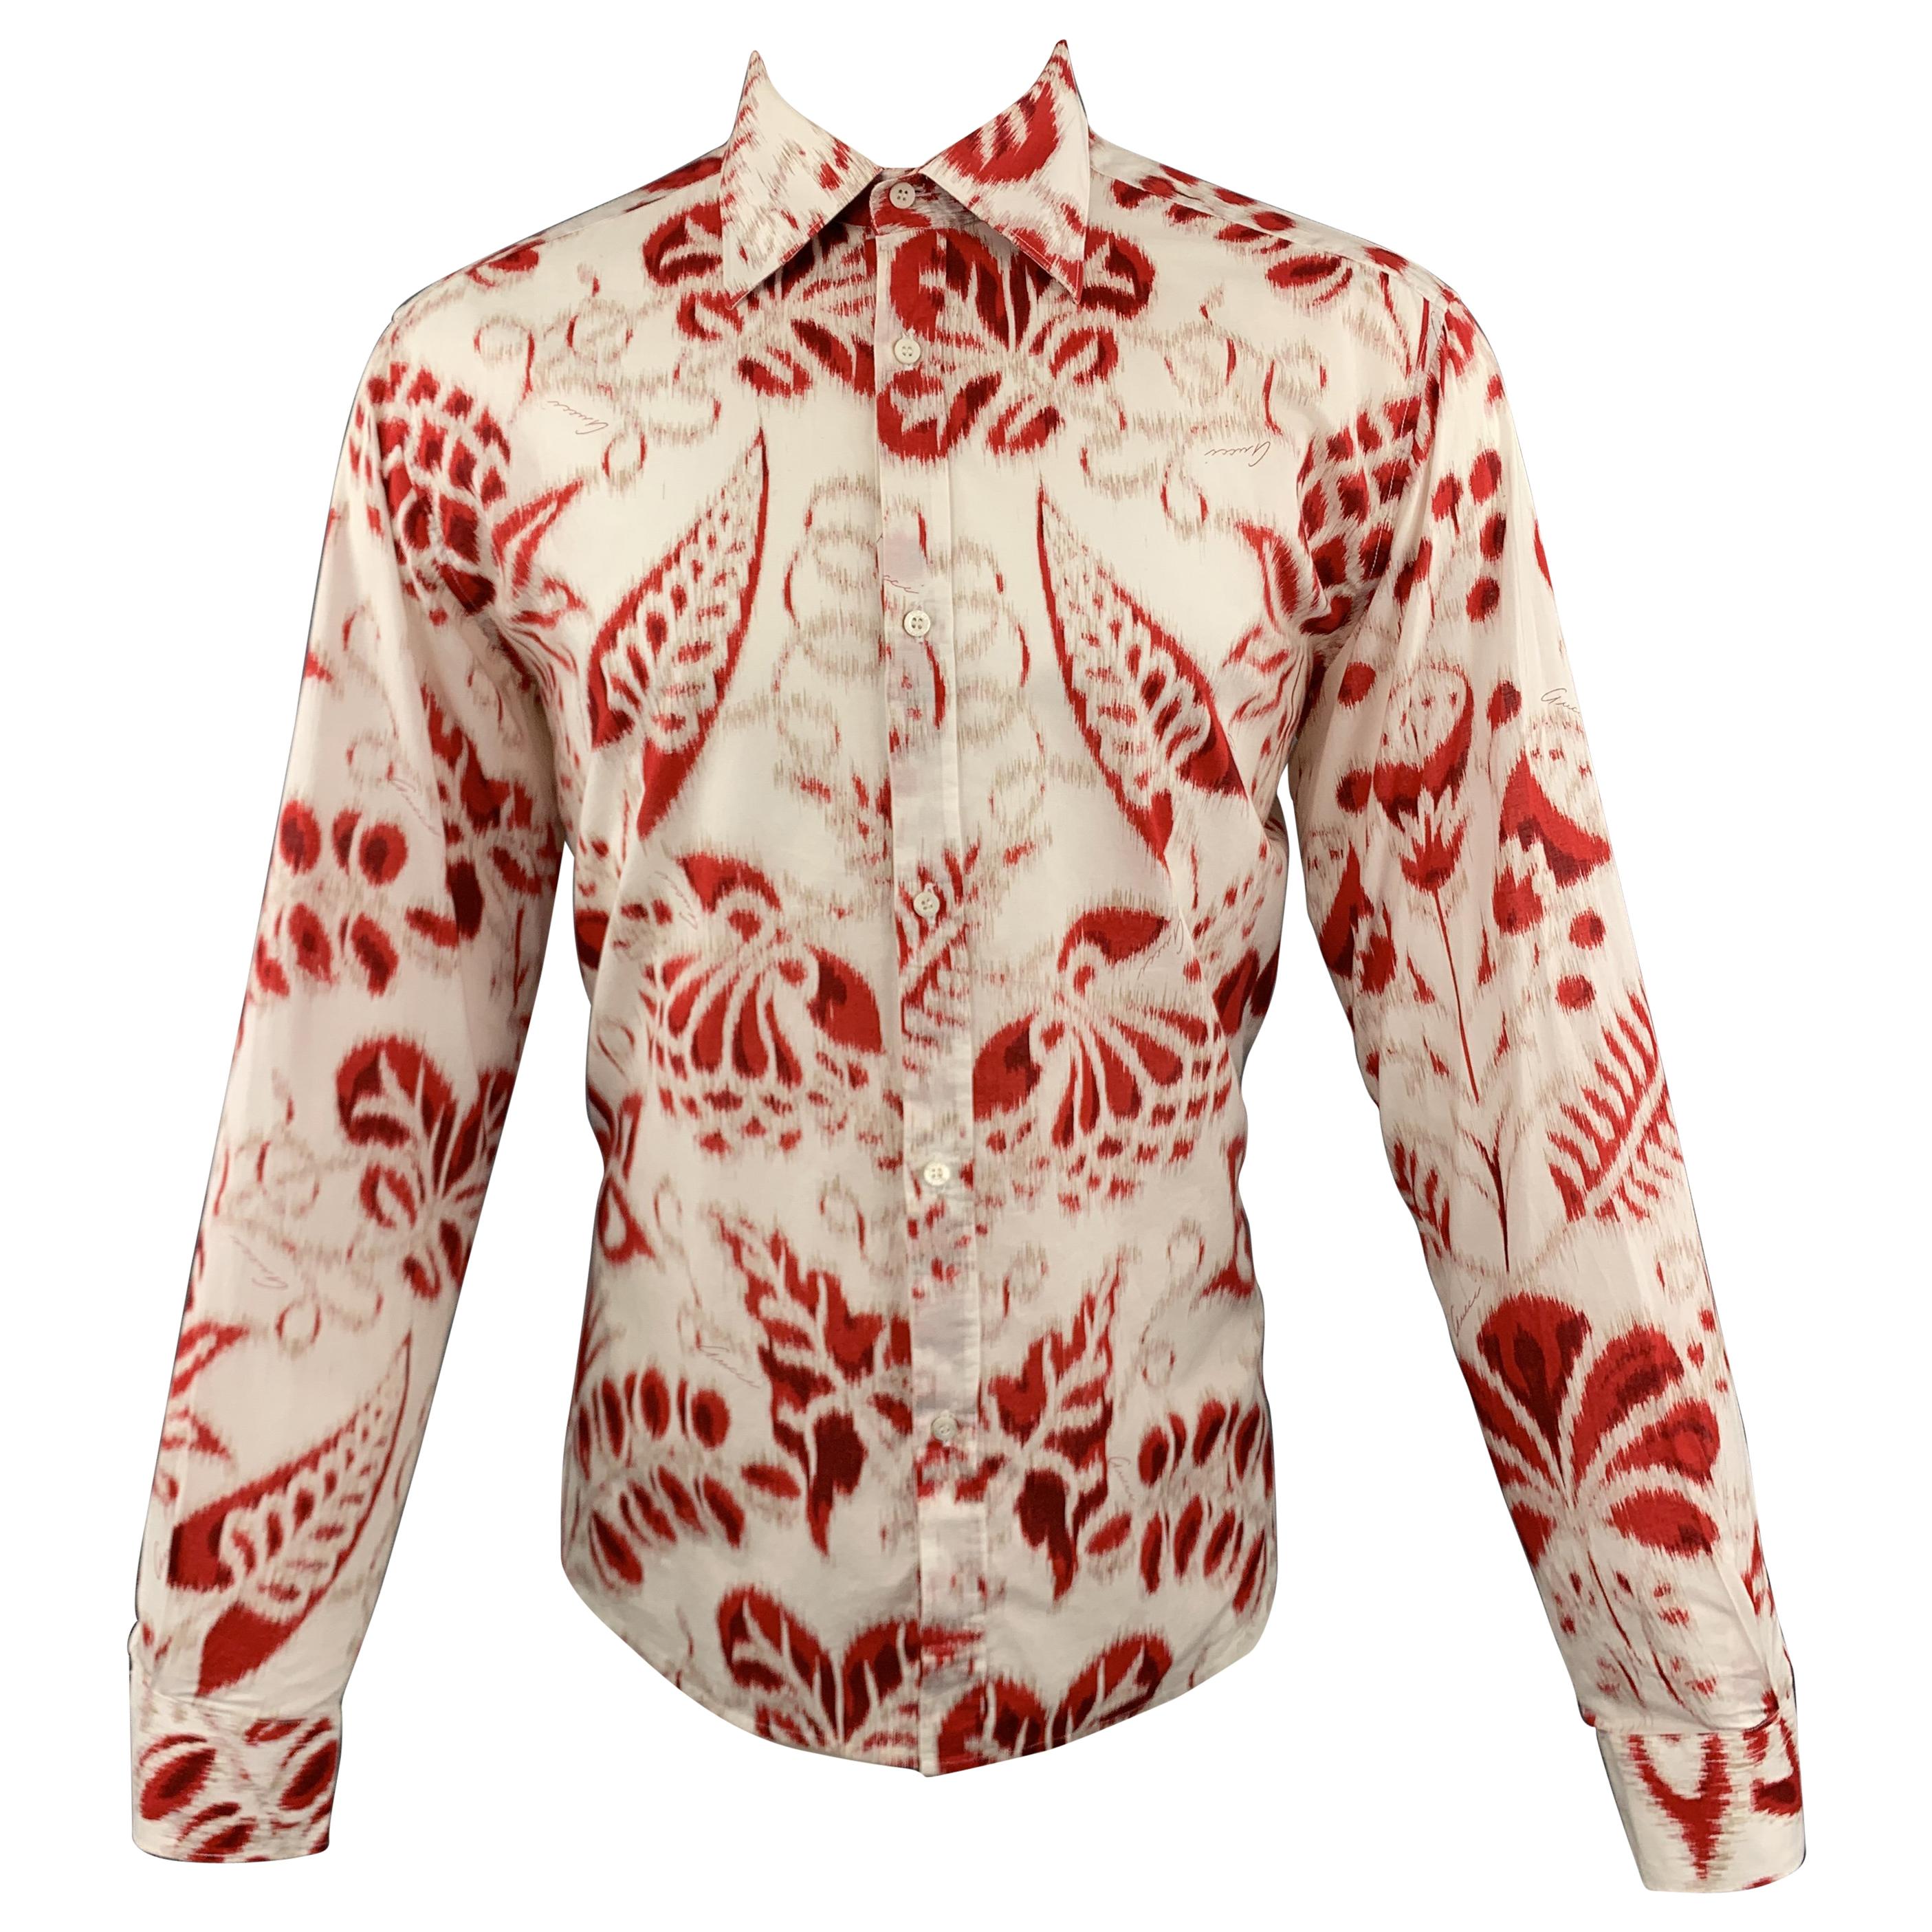 GUCCI by TOM FORD L White & Red Floral Print Cotton Button Up Long Sleeve Shirt